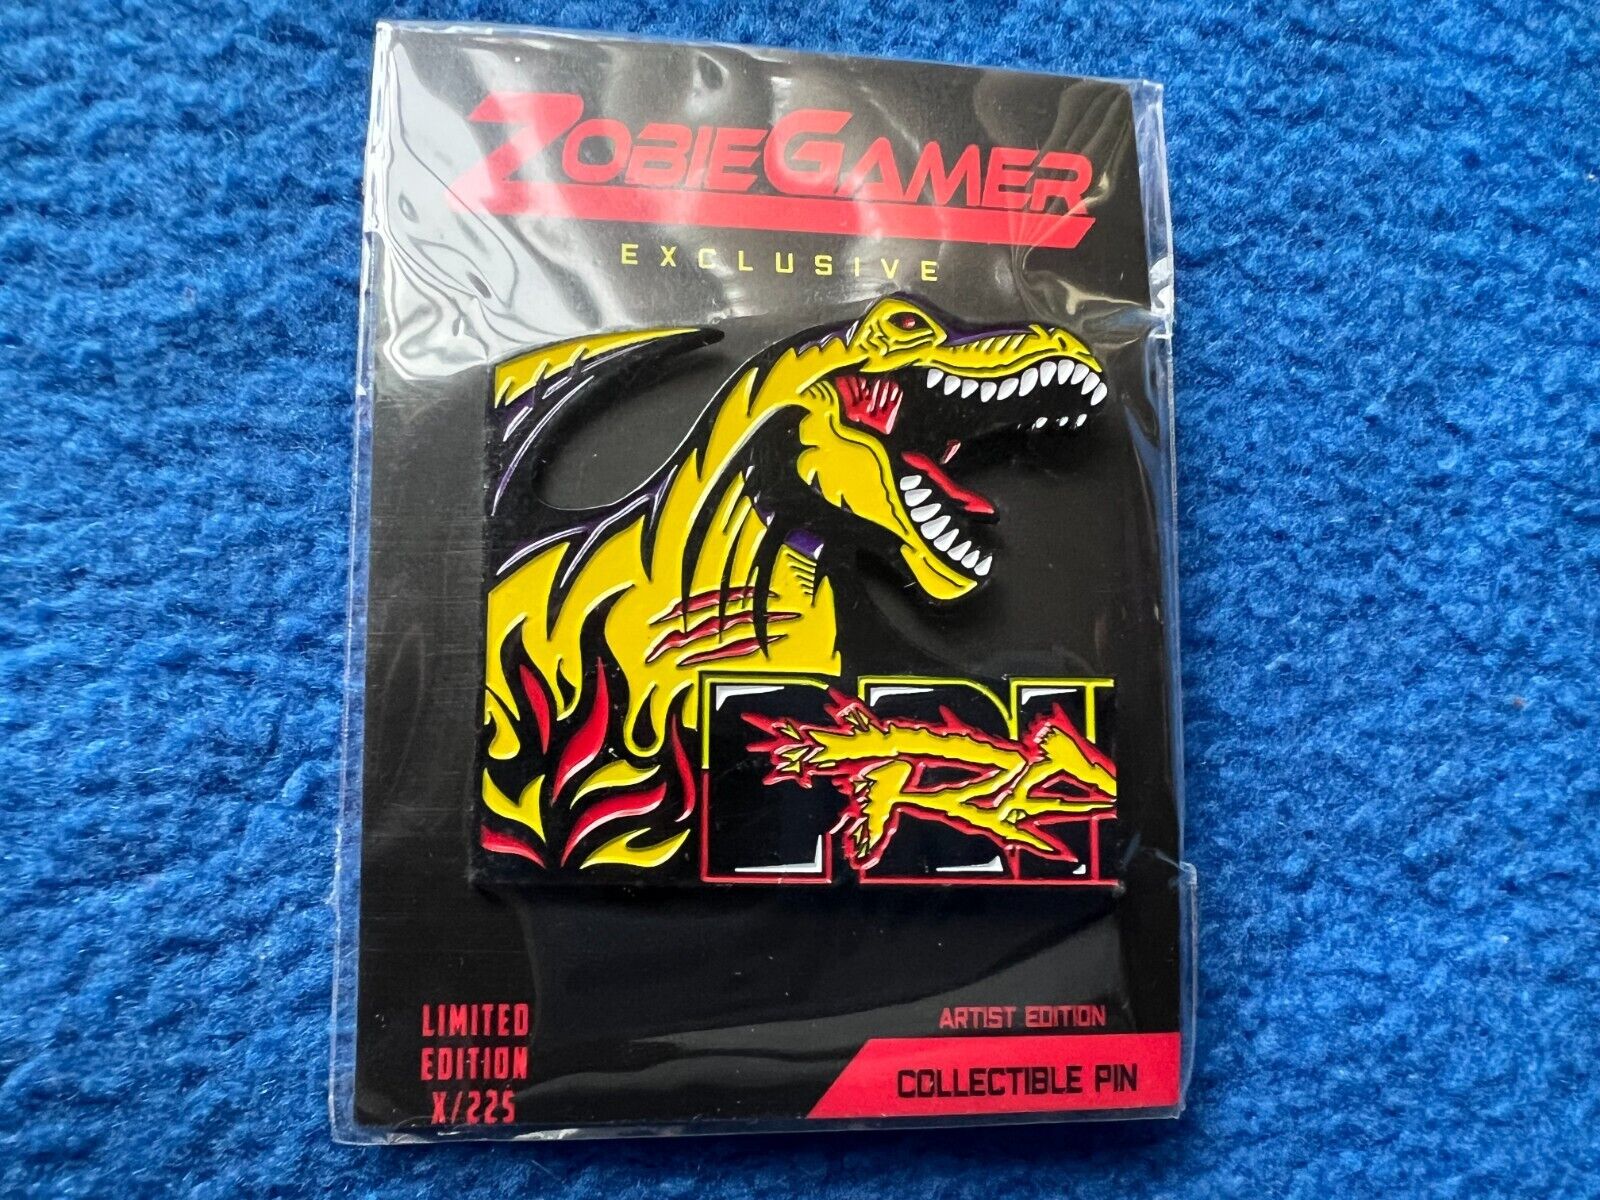 Primal Rage Sauron Limited Edition Pin #/225 Zobie Gamer Collectible Video Game